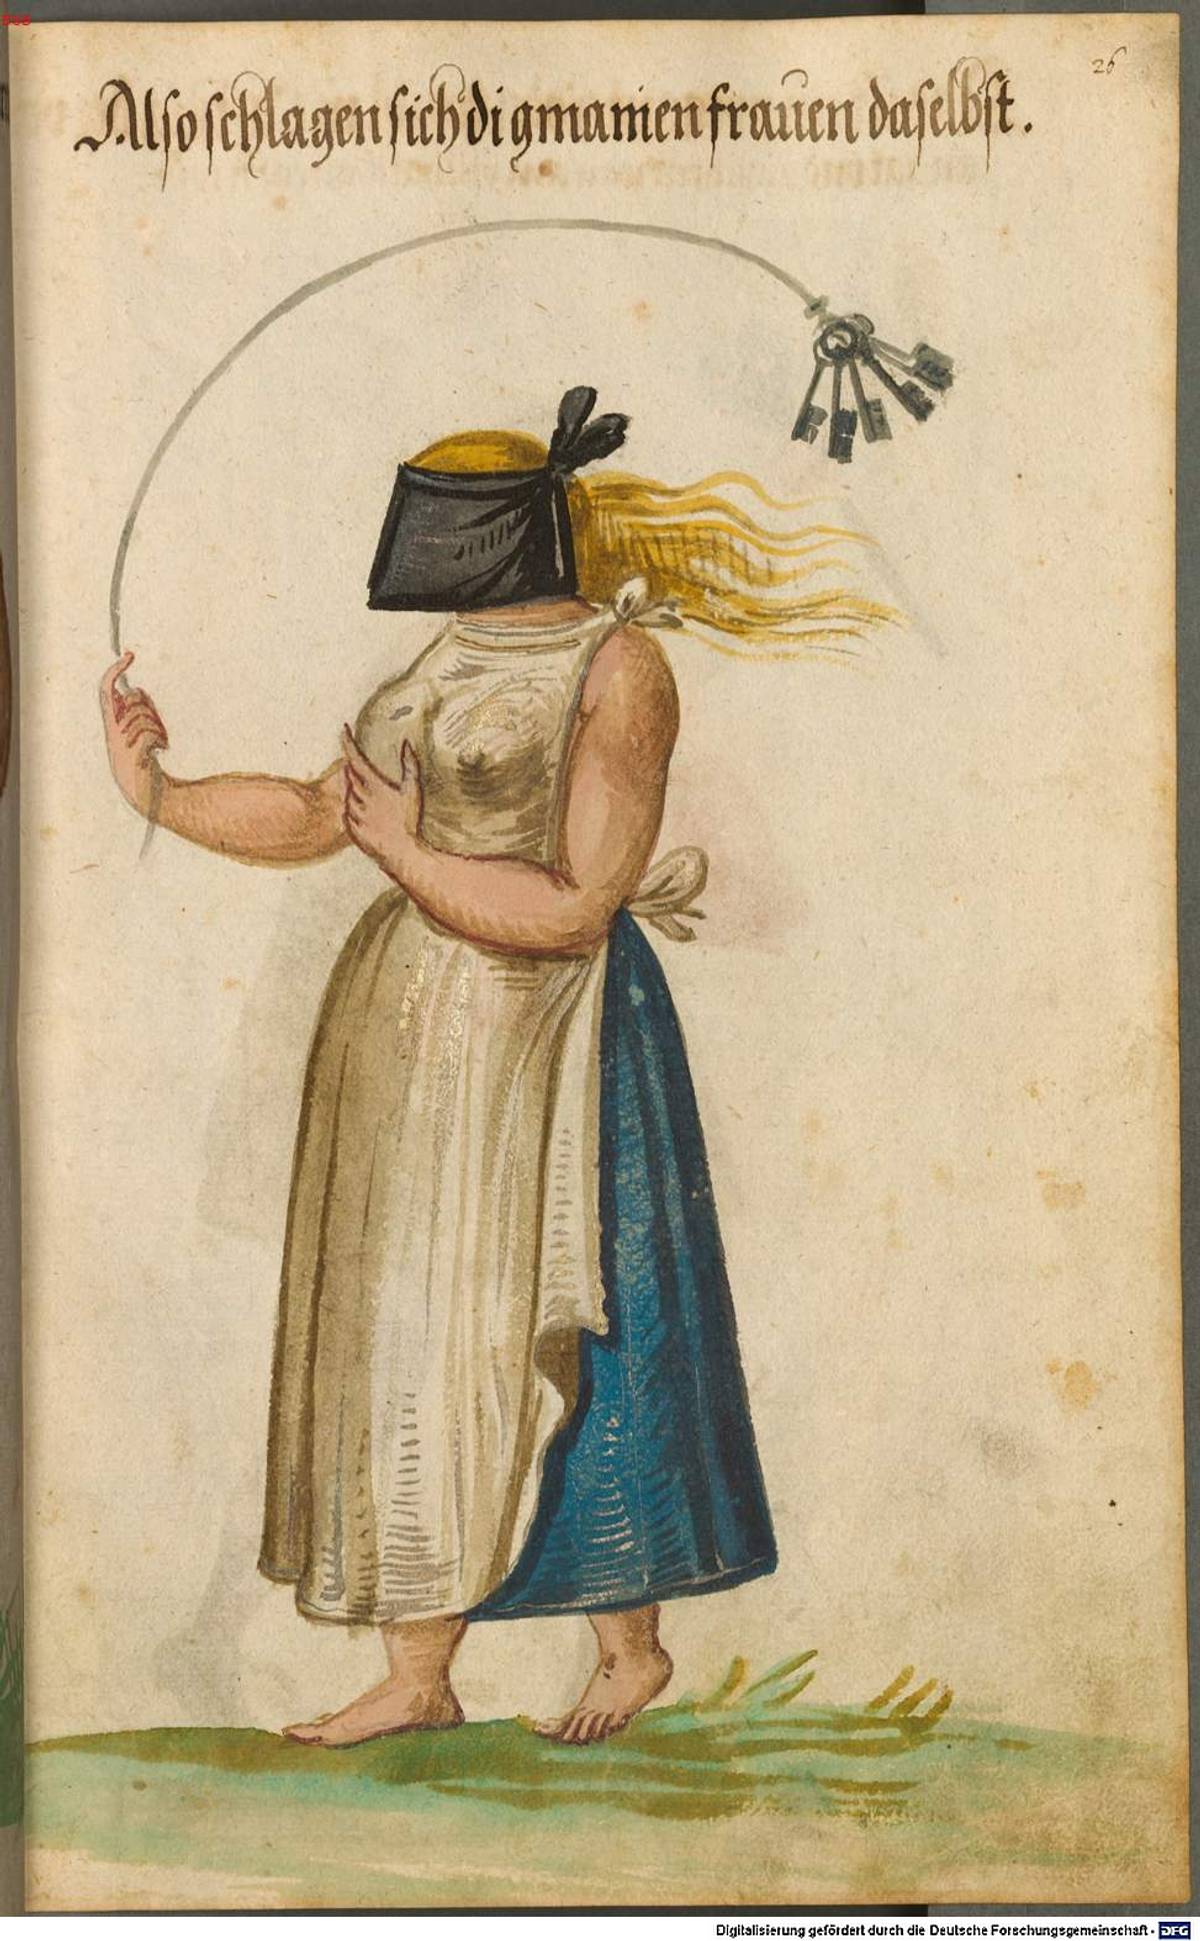 Self-flagellant, from ‘Kostümbuch’ (Costume Book); copy based on the costume book by Christoph Weiditz, Munich, circa 1600